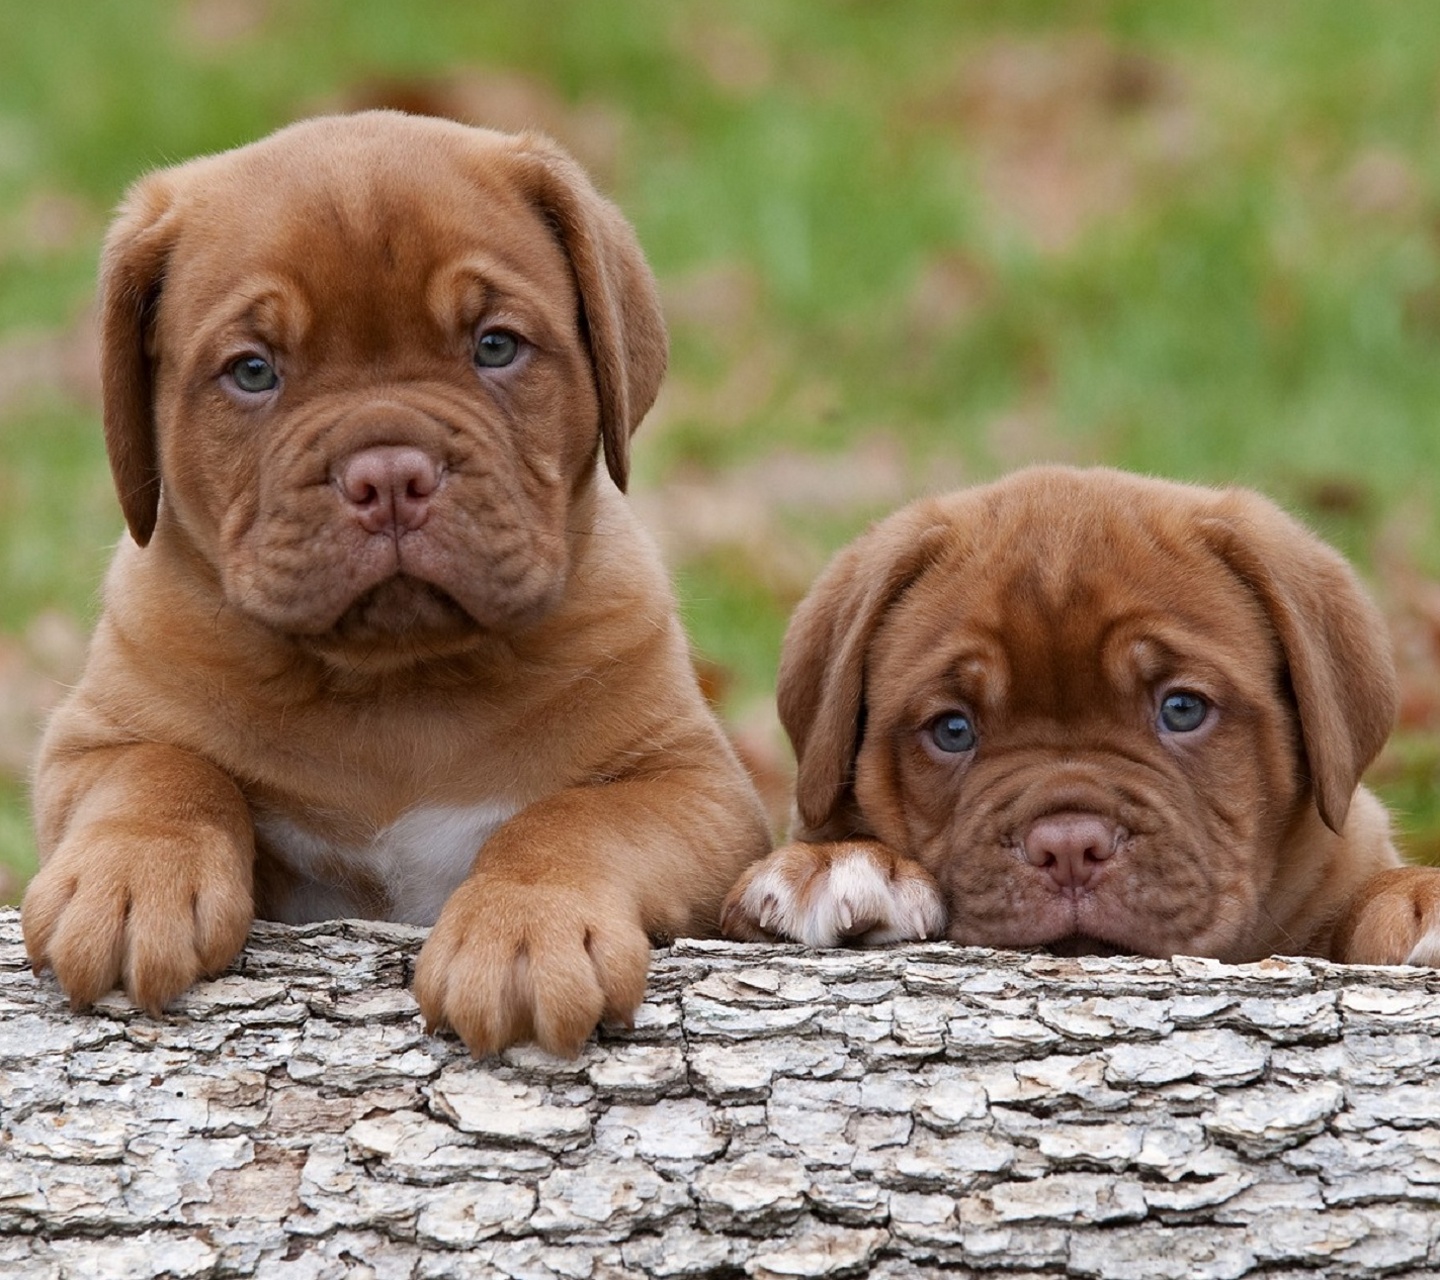 Description Cute Puppies Cell Phone Wallpaper For All